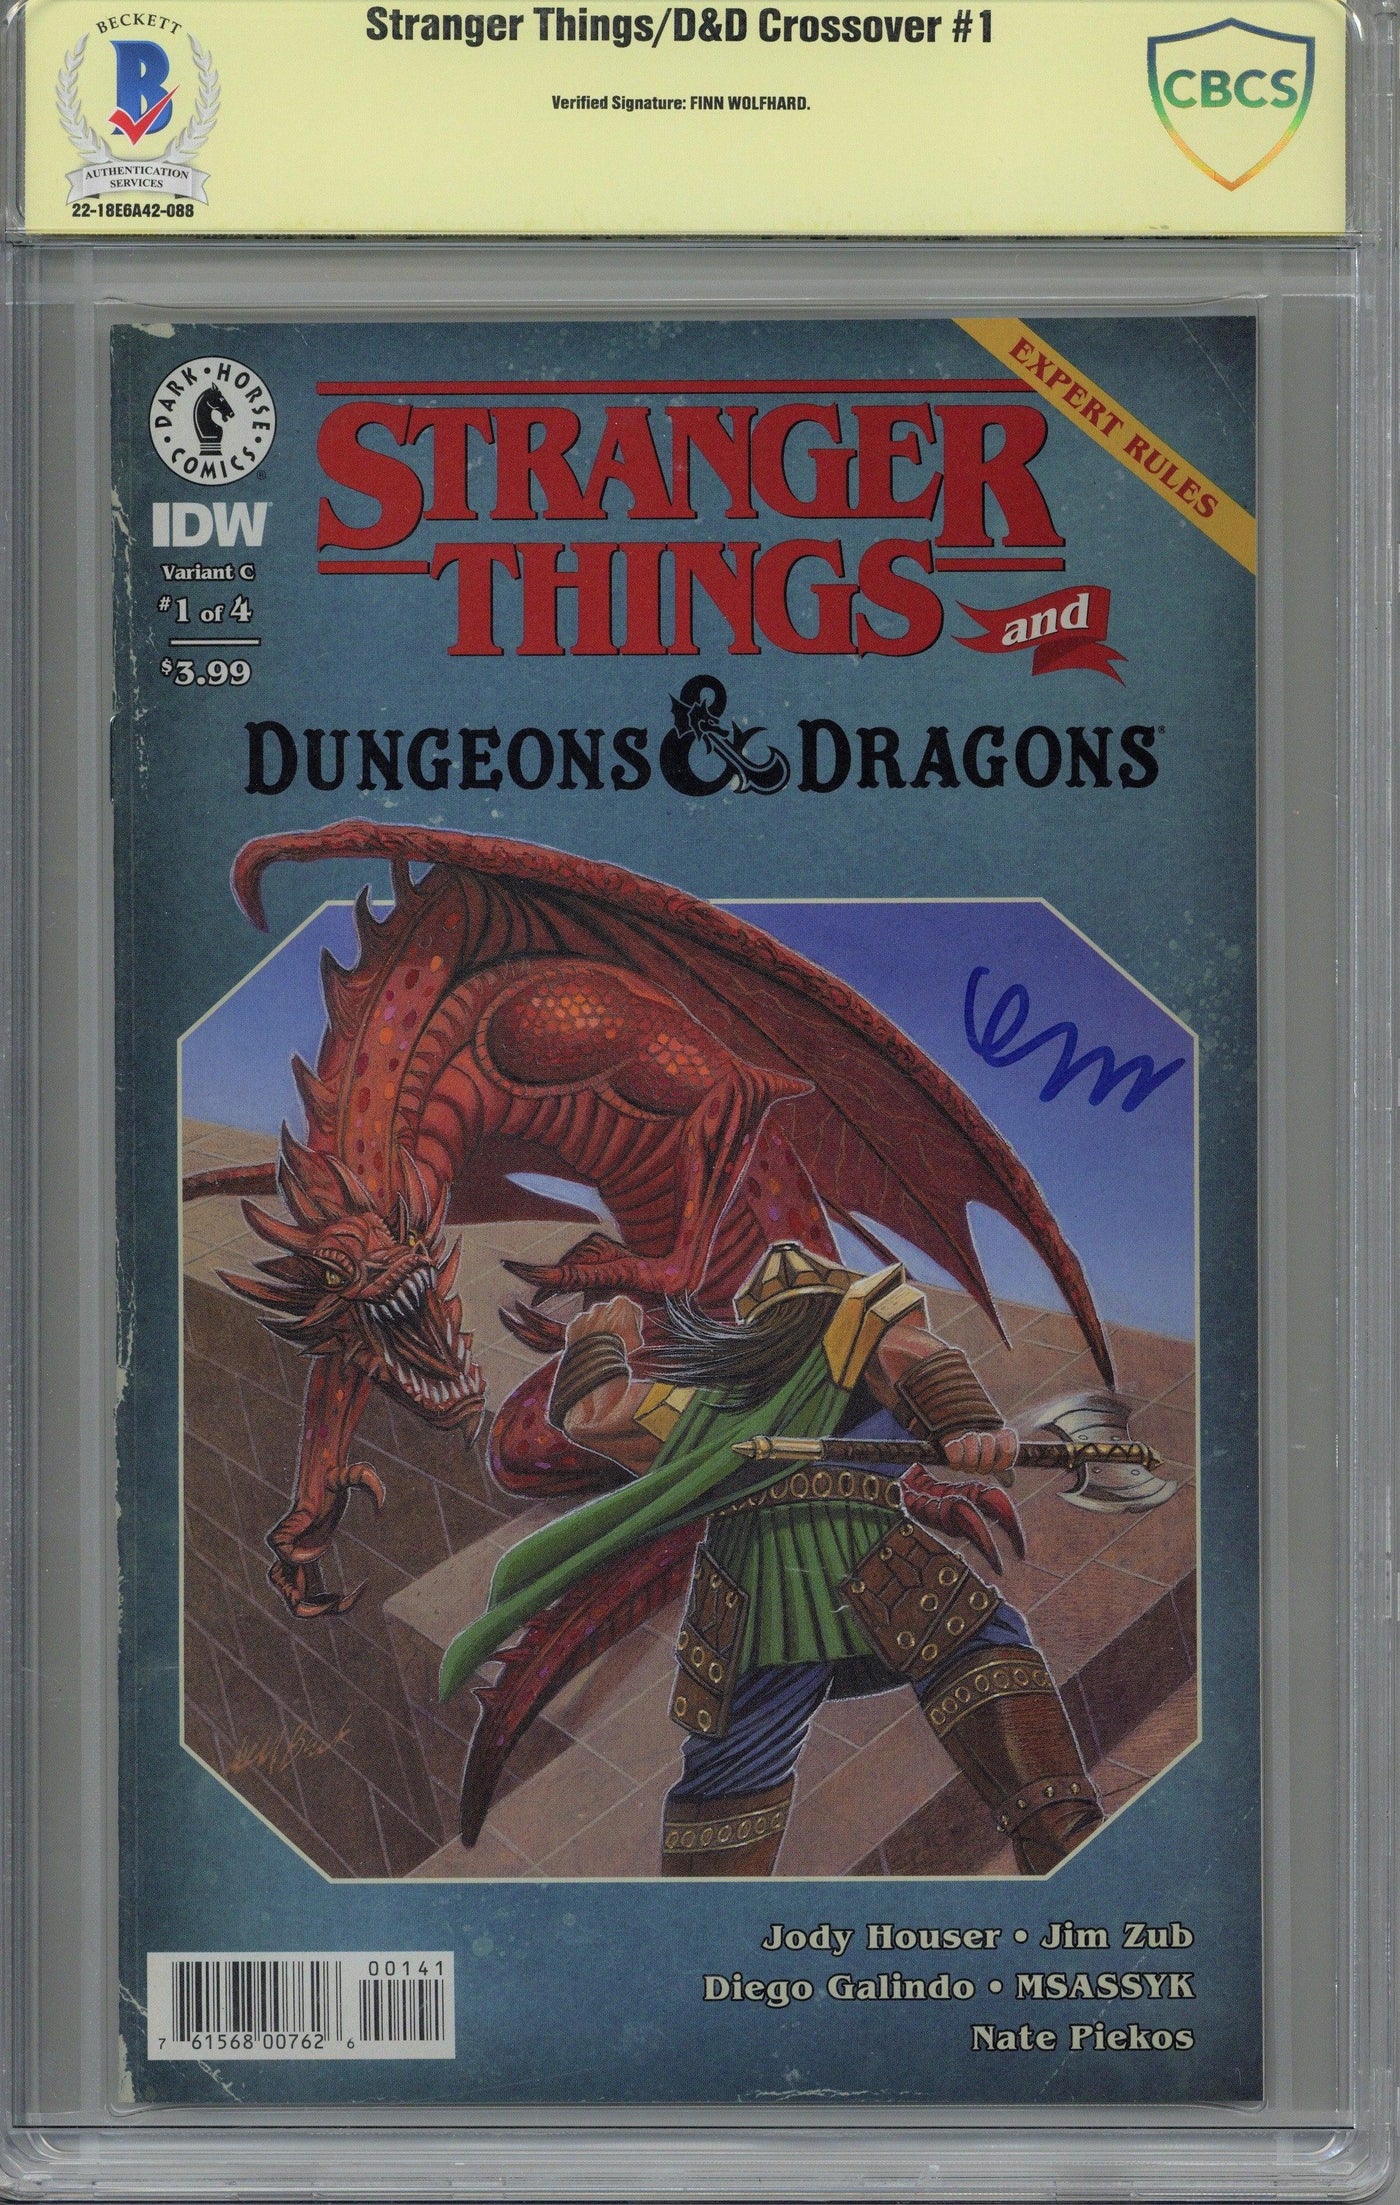 Finn Wolfhard Signed Stranger Things Dungeons & Dragons Comic Book Signed CBCS